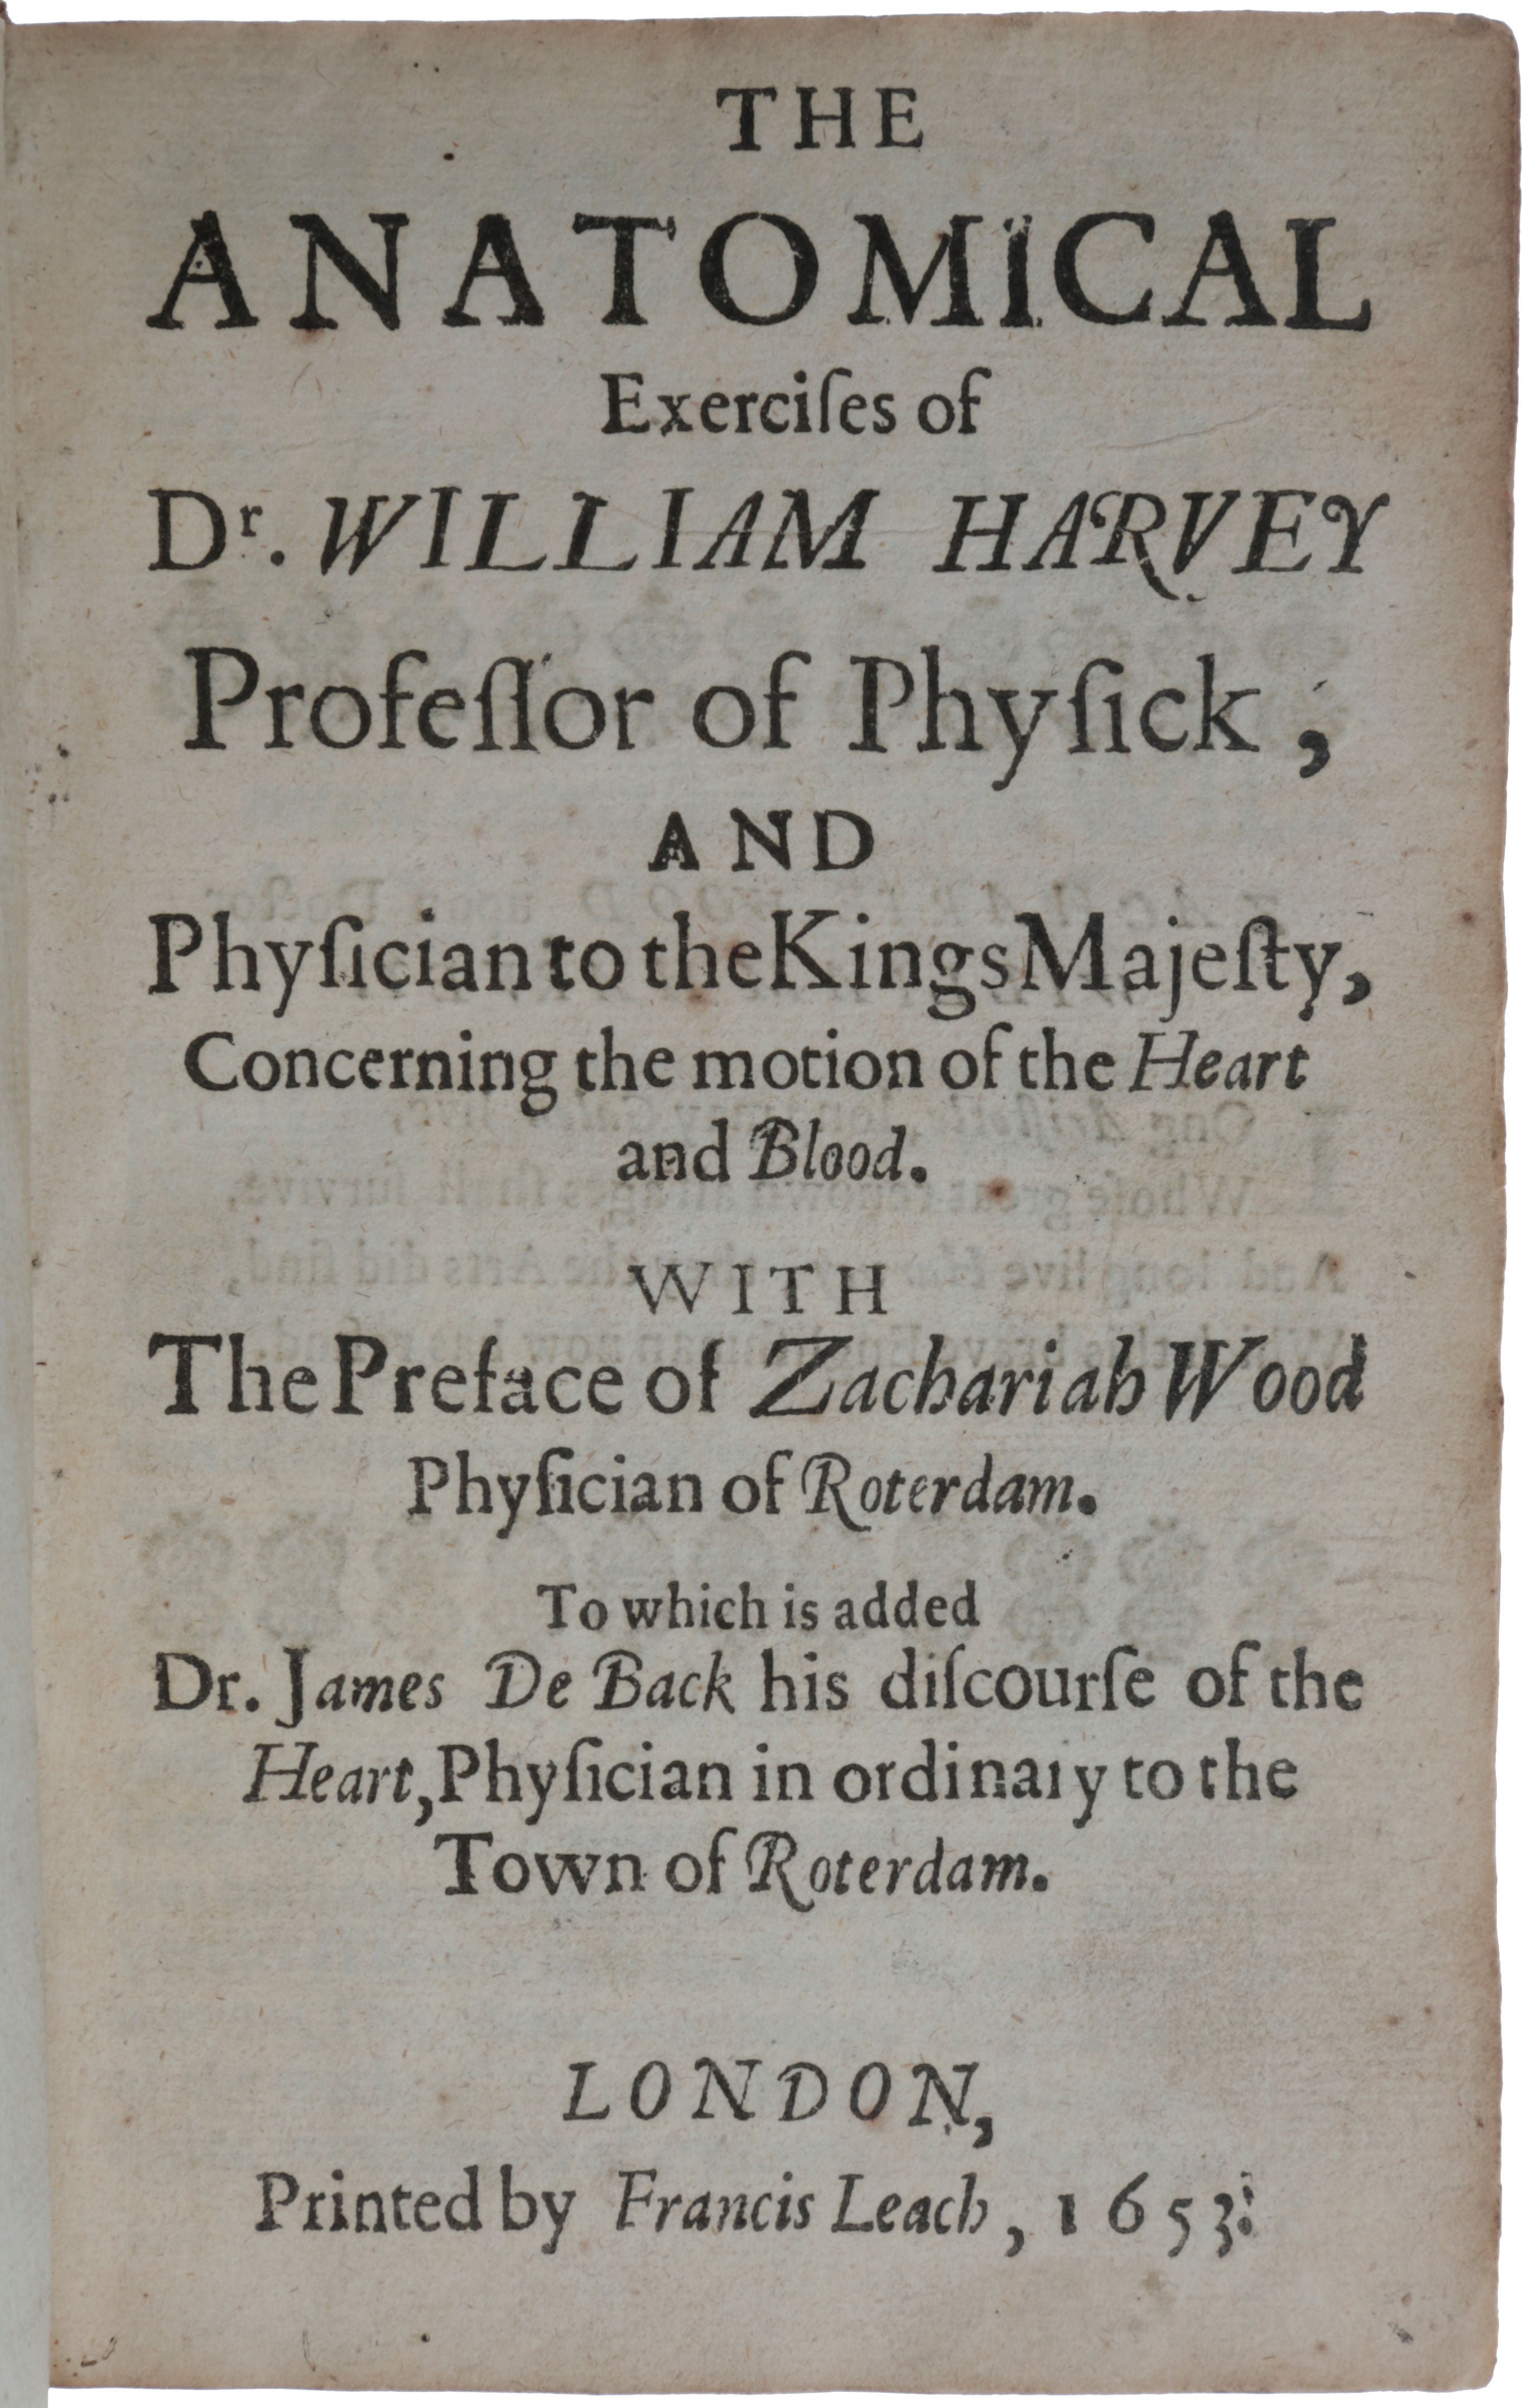 Item #5638 The Anatomical Exercises of Dr. William Harvey, Professor of Physick, and Physician to the Kings Majesty, Concerning the motion of the Heart and Blood. With the preface of Zachariah Wood Physician of Roterdam. To which is added Dr. James De Back his discourse of the Heart, Physician in ordinary to the Town of Roterdam. William HARVEY.